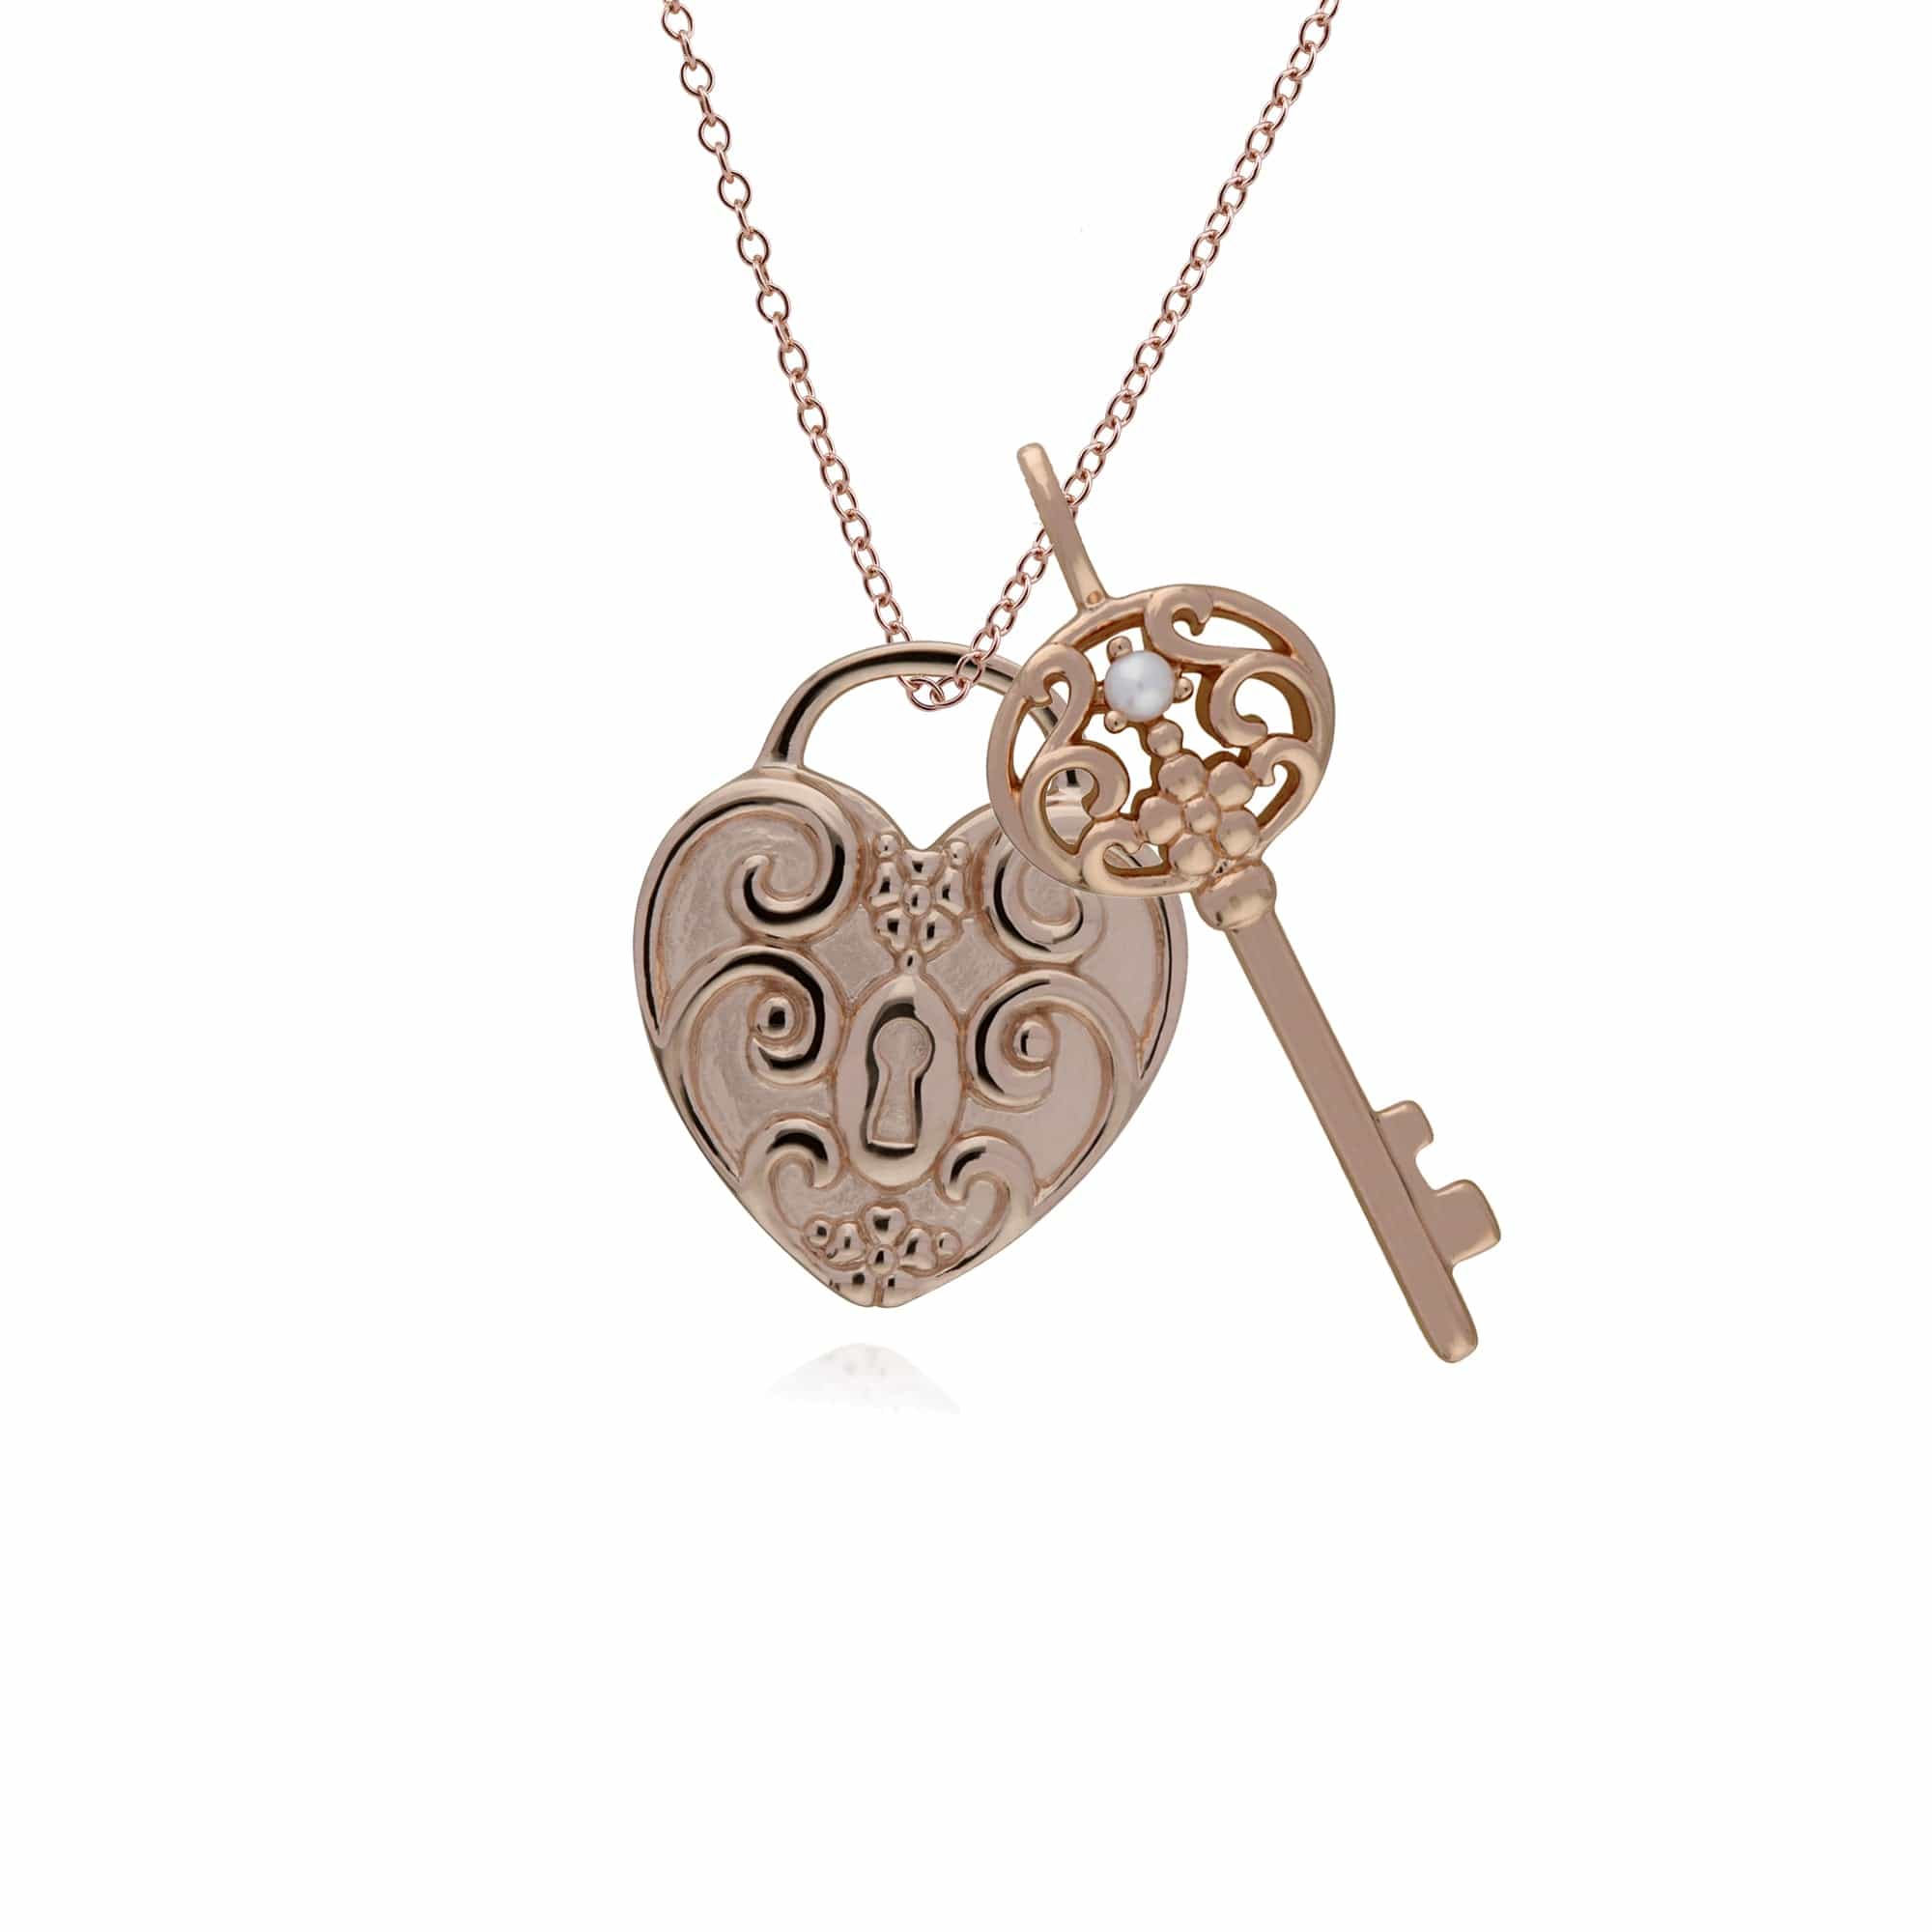 270P026101925-270P026501925 Classic Swirl Heart Lock Pendant & Pearl Big Key Charm in Rose Gold Plated 925 Sterling Silver 1